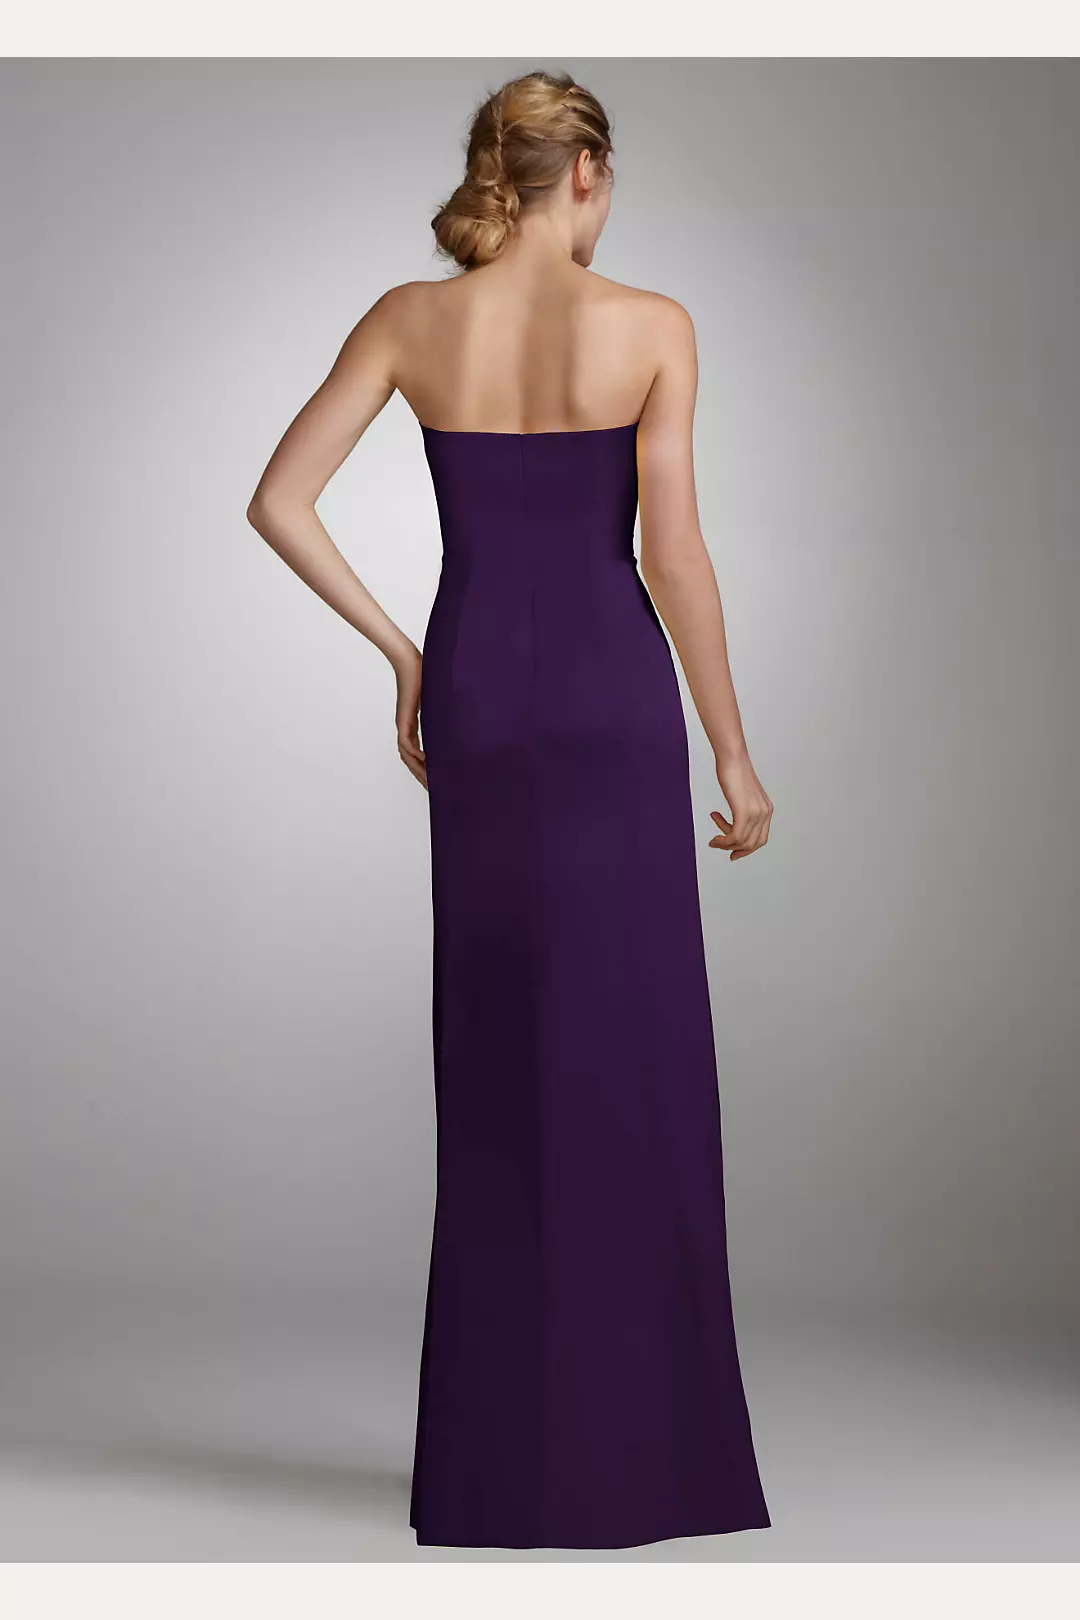 Strapless Long Charmeuse Dress with Slit Image 2